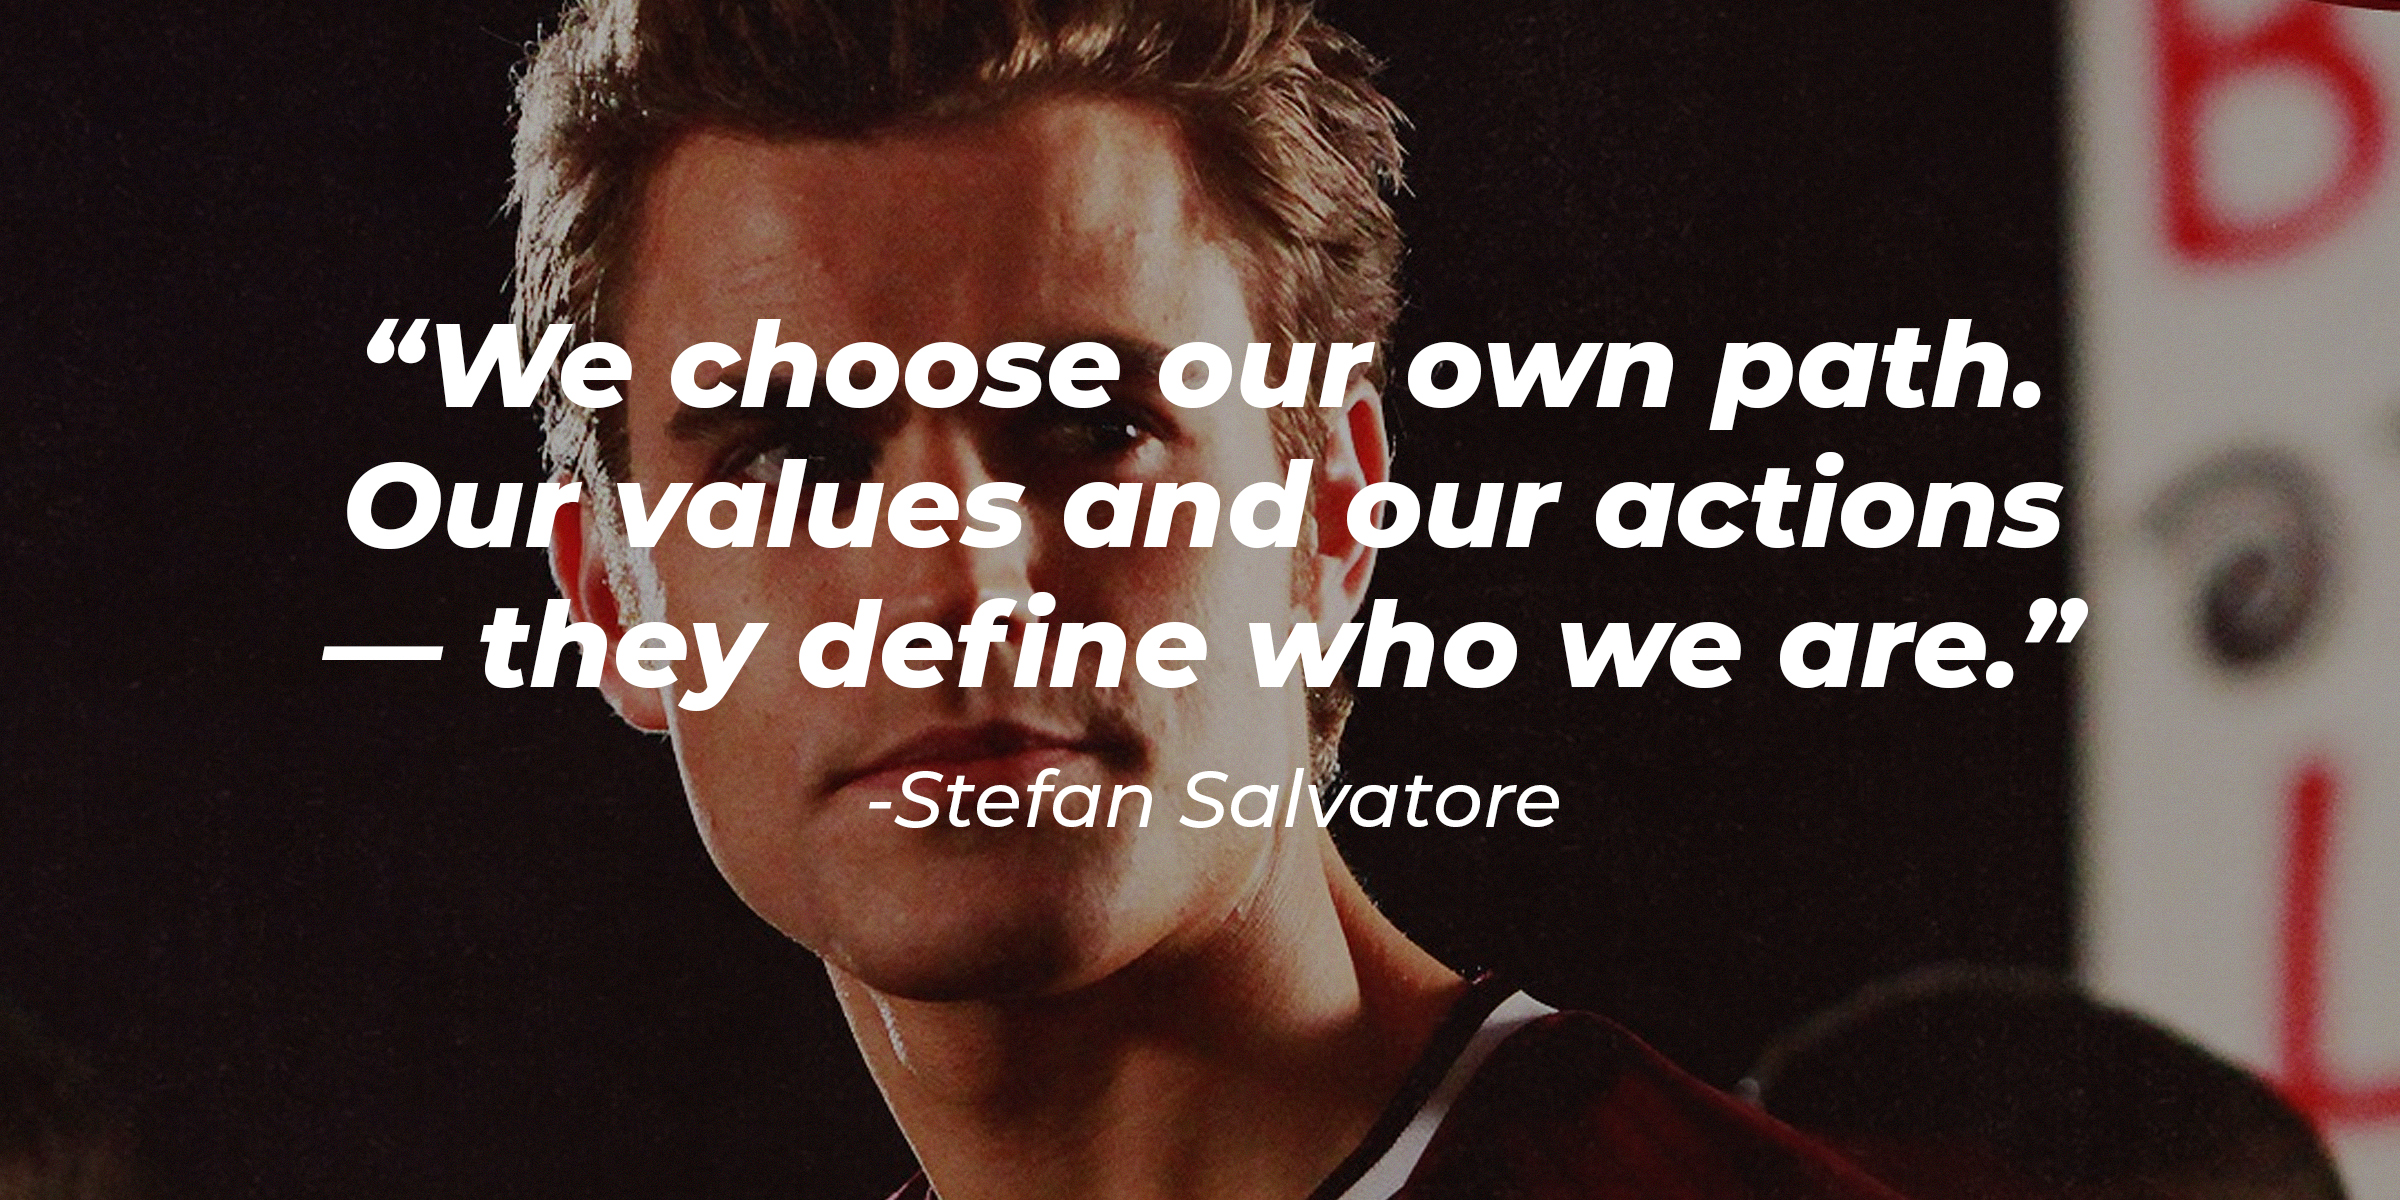 A photo of Stefan Salvatore with the quote: "We choose our own path. Our values and our actions — they define who we are." | Source: facebook.com/thevampirediaries